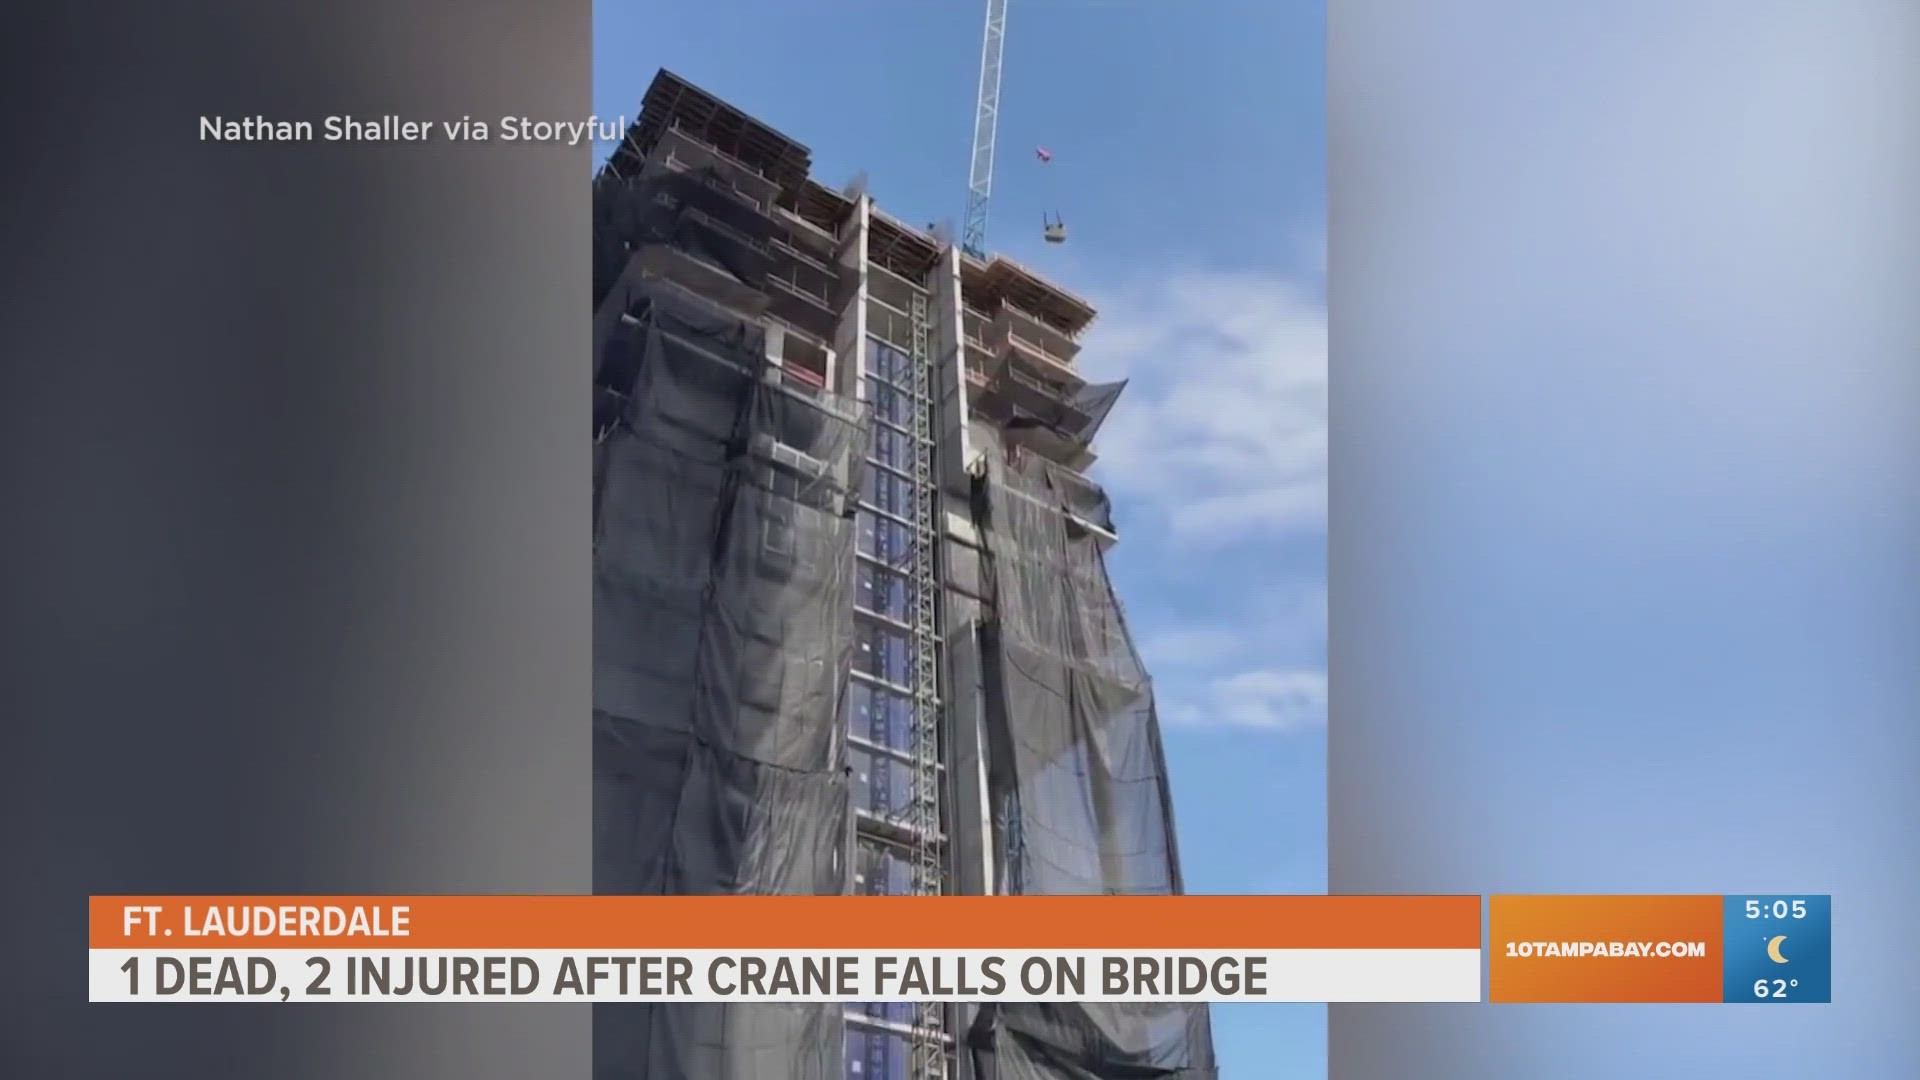 One person died and two are injured after a crane fell on a bridge in Fort Lauderdale.